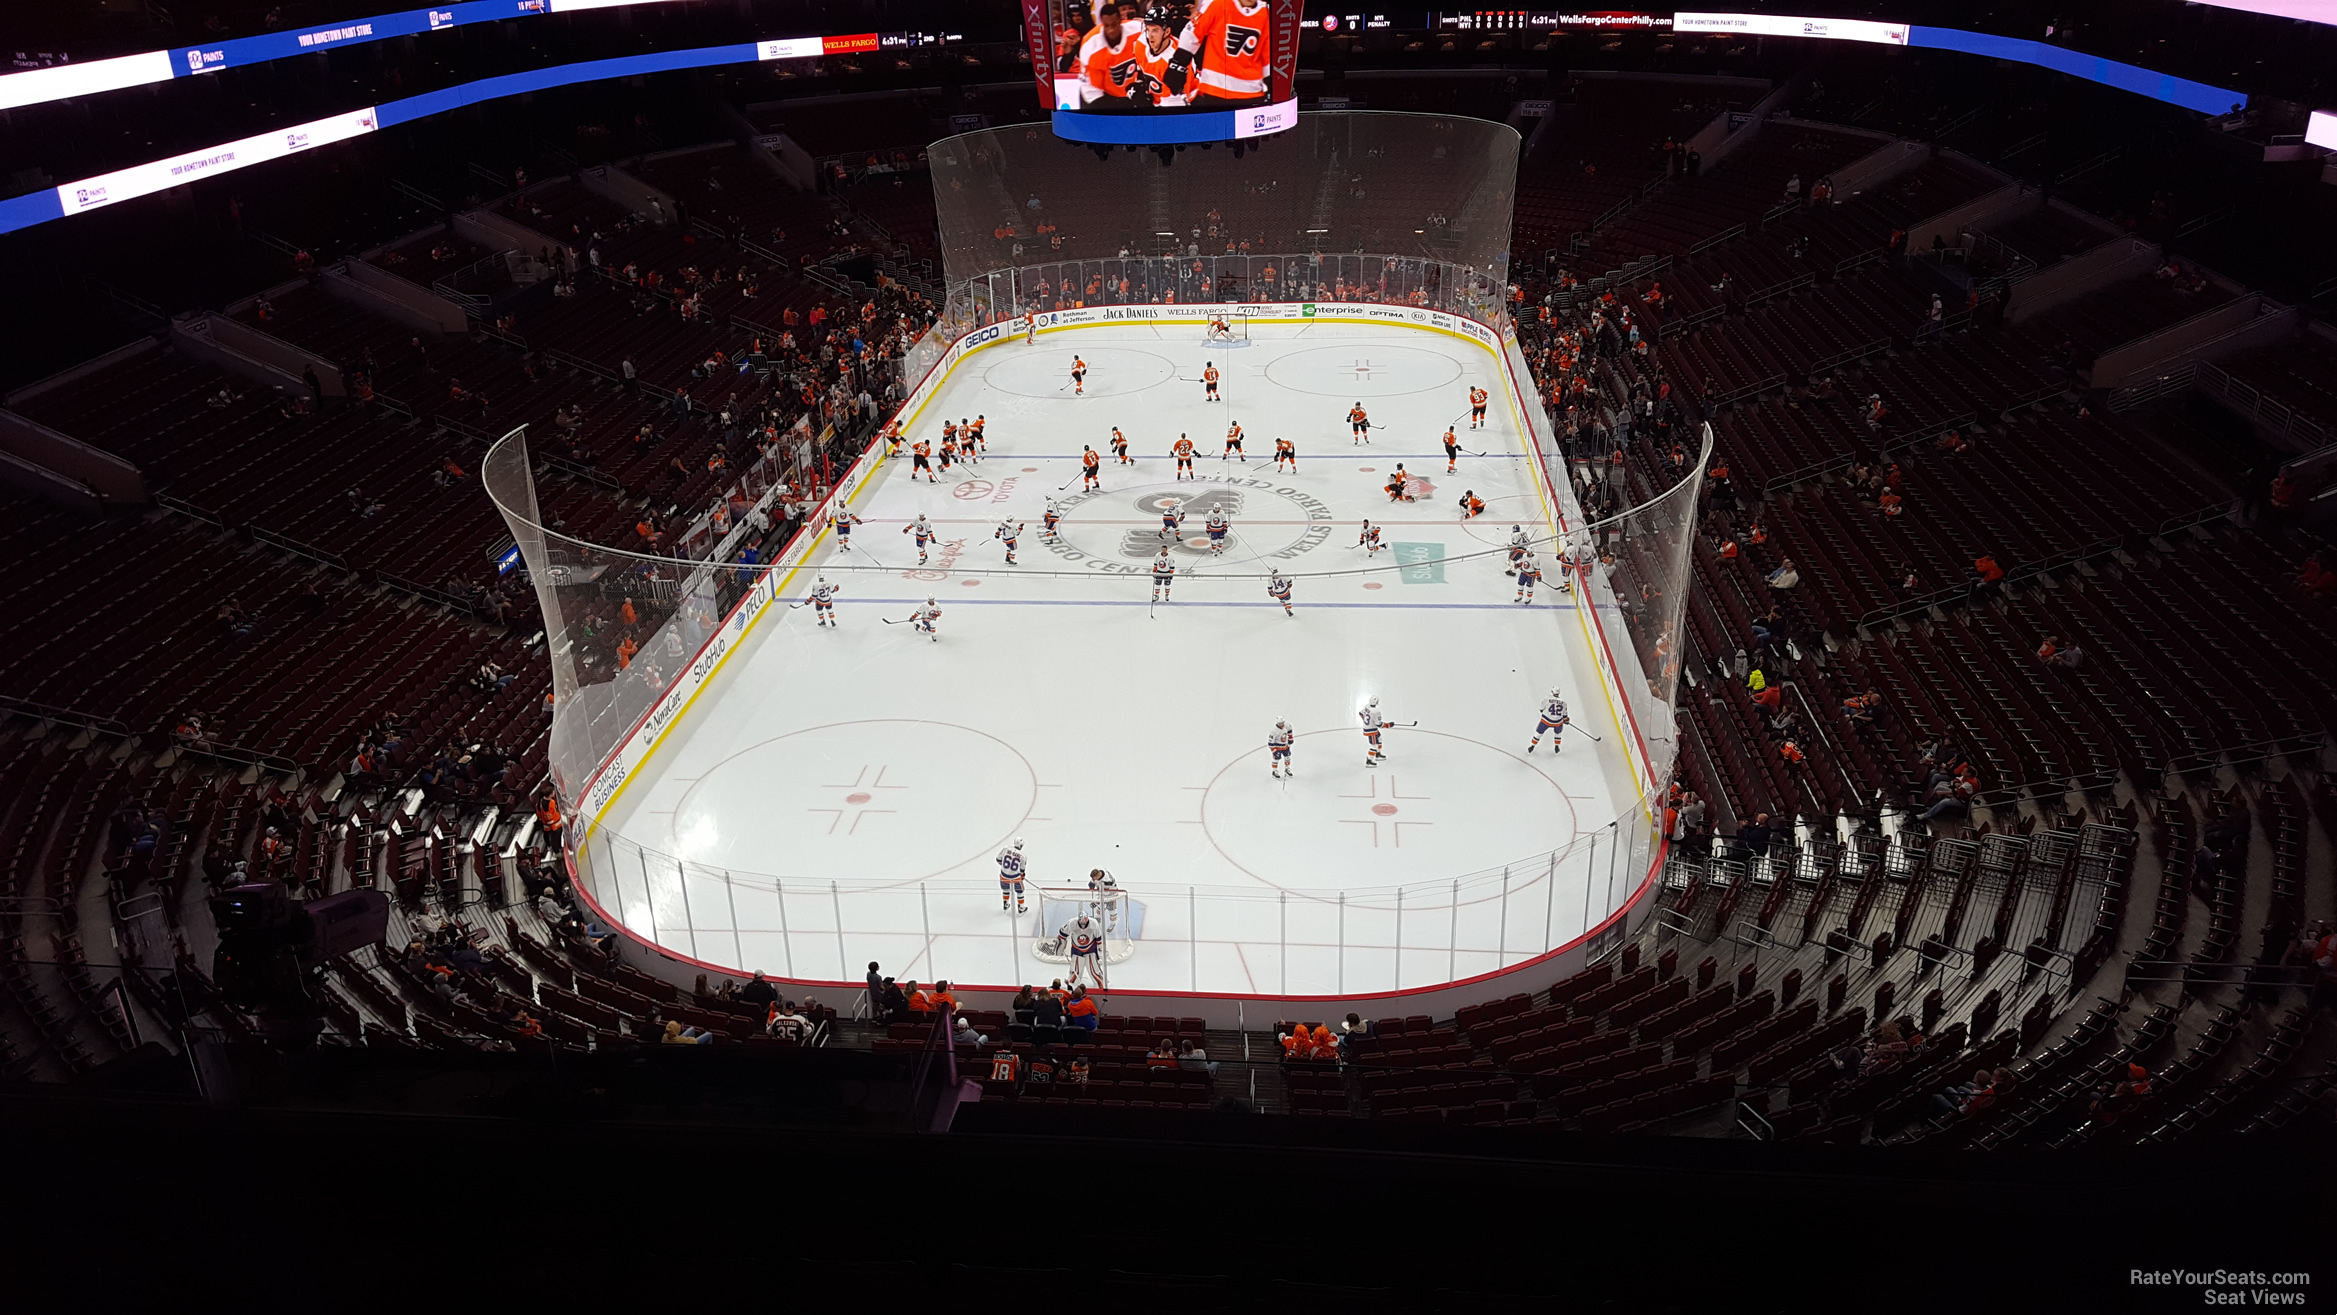 section 207a, row 8 seat view  for hockey - wells fargo center